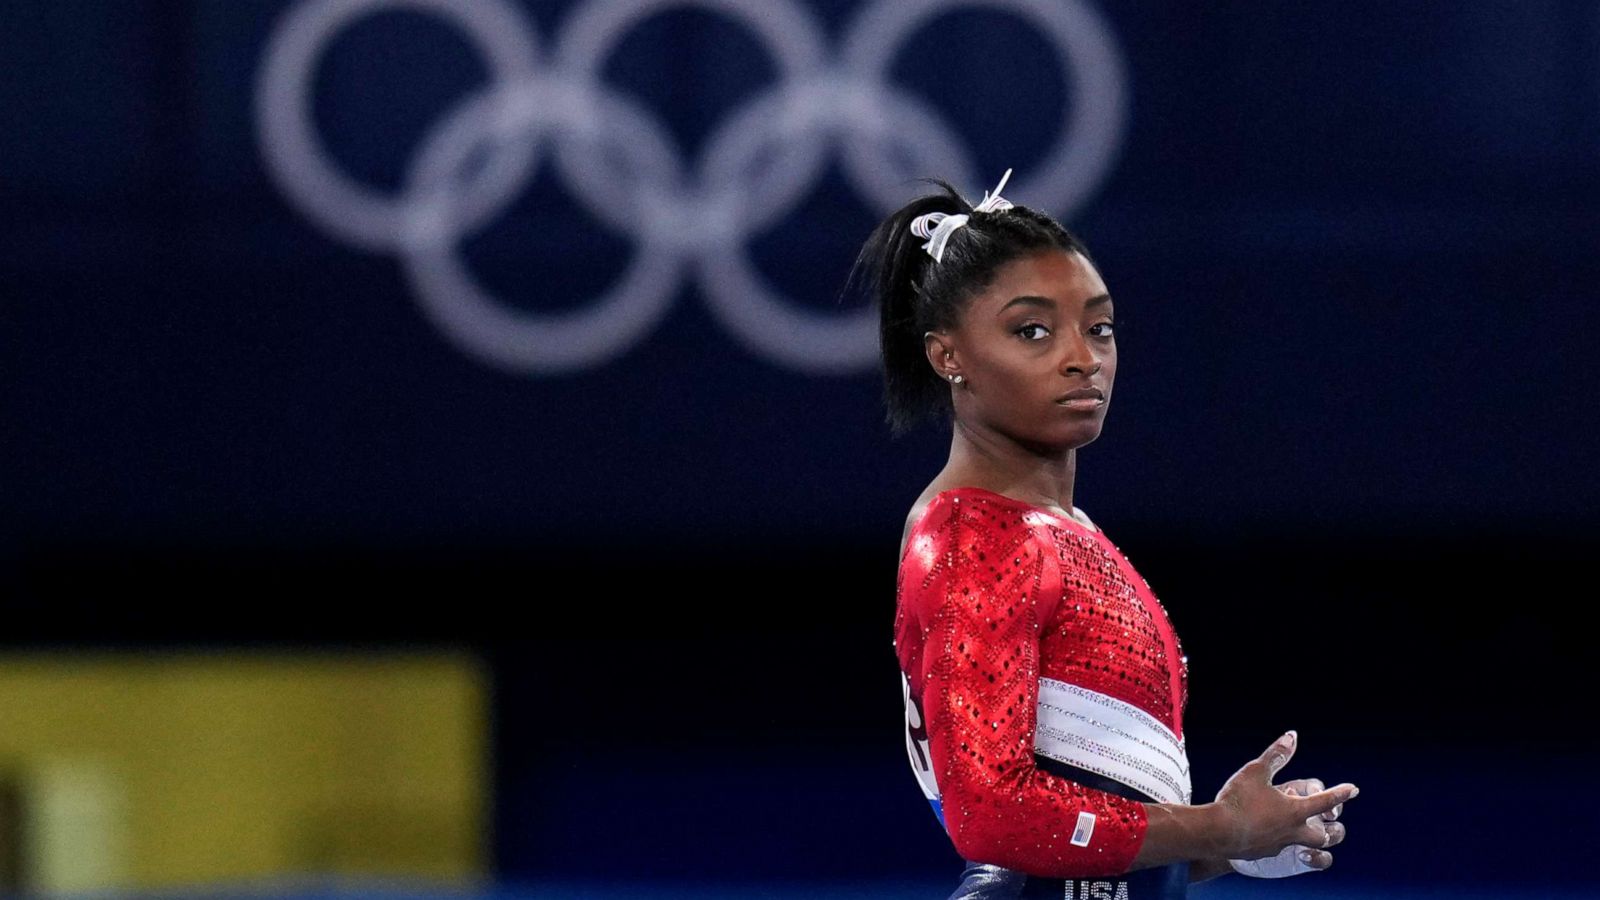 Which gymnastics skill is Simone Biles known for on the balance beam?